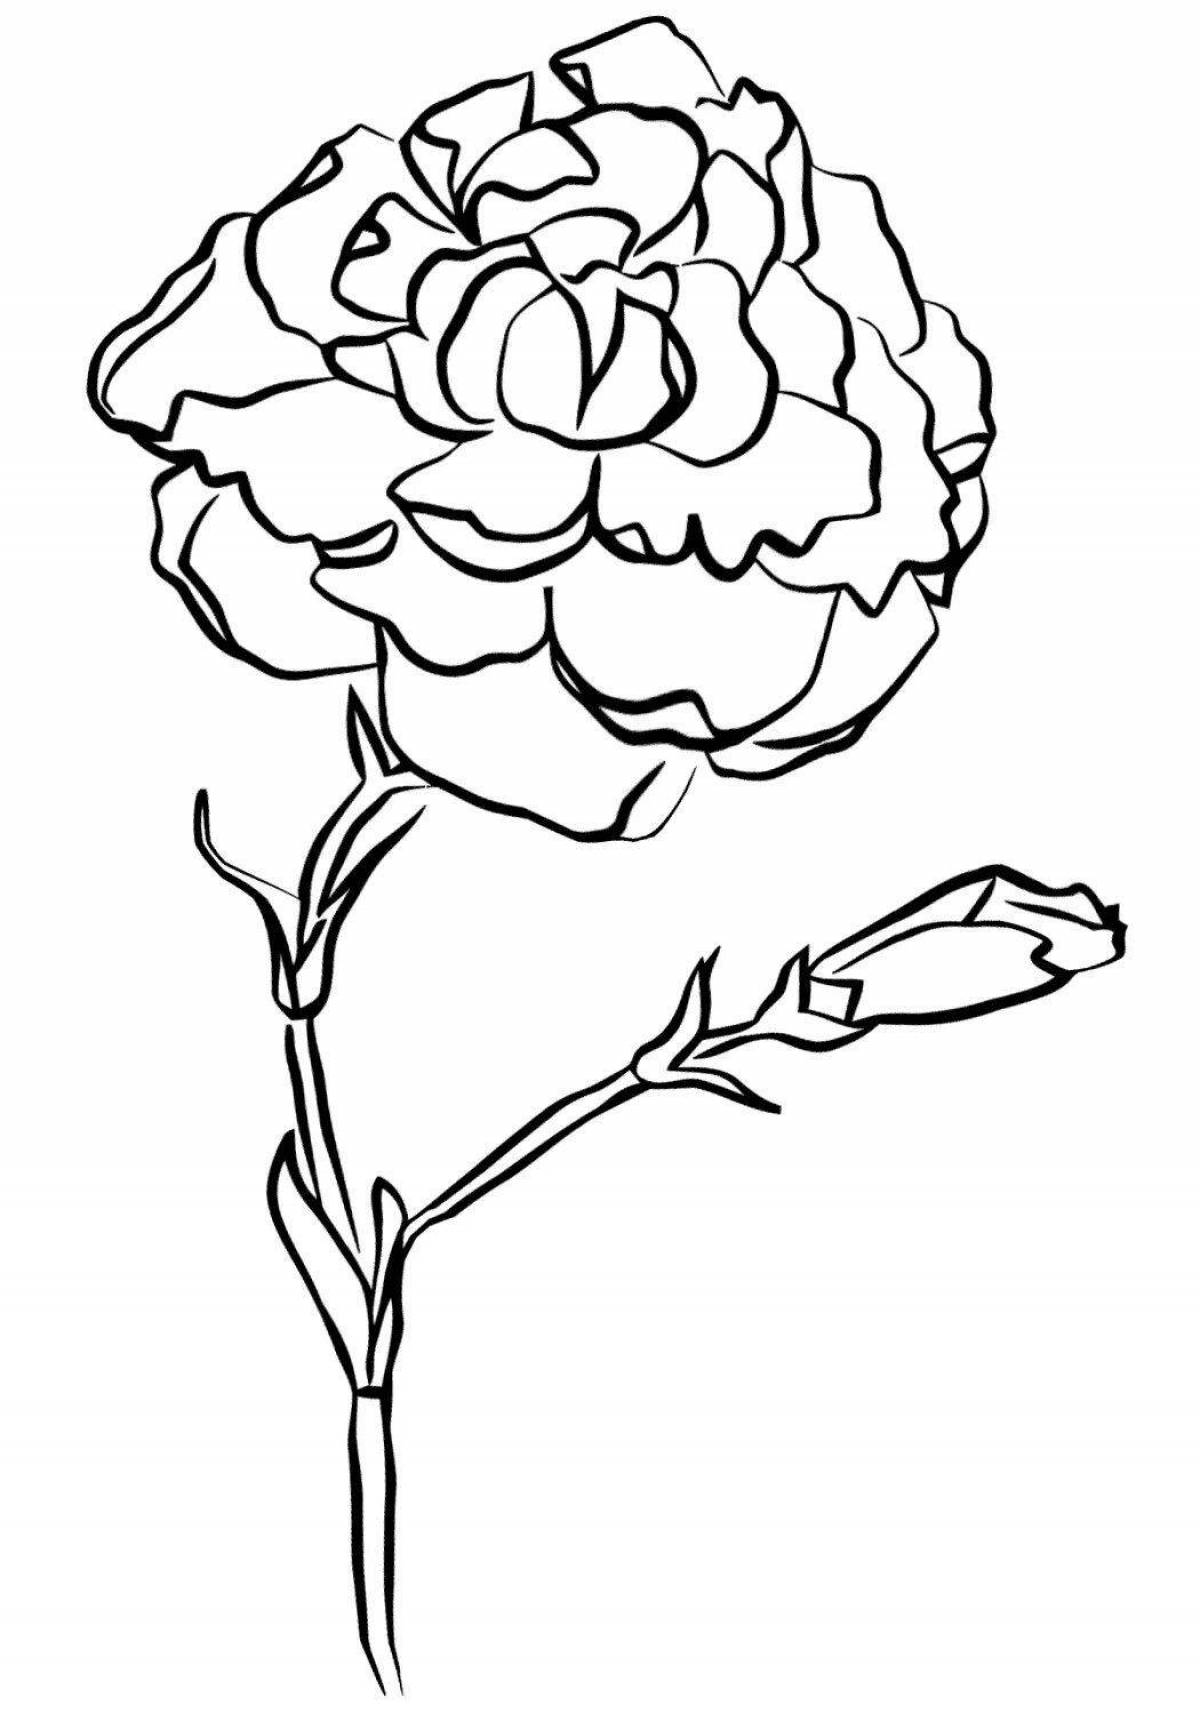 Gorgeous carnations coloring book